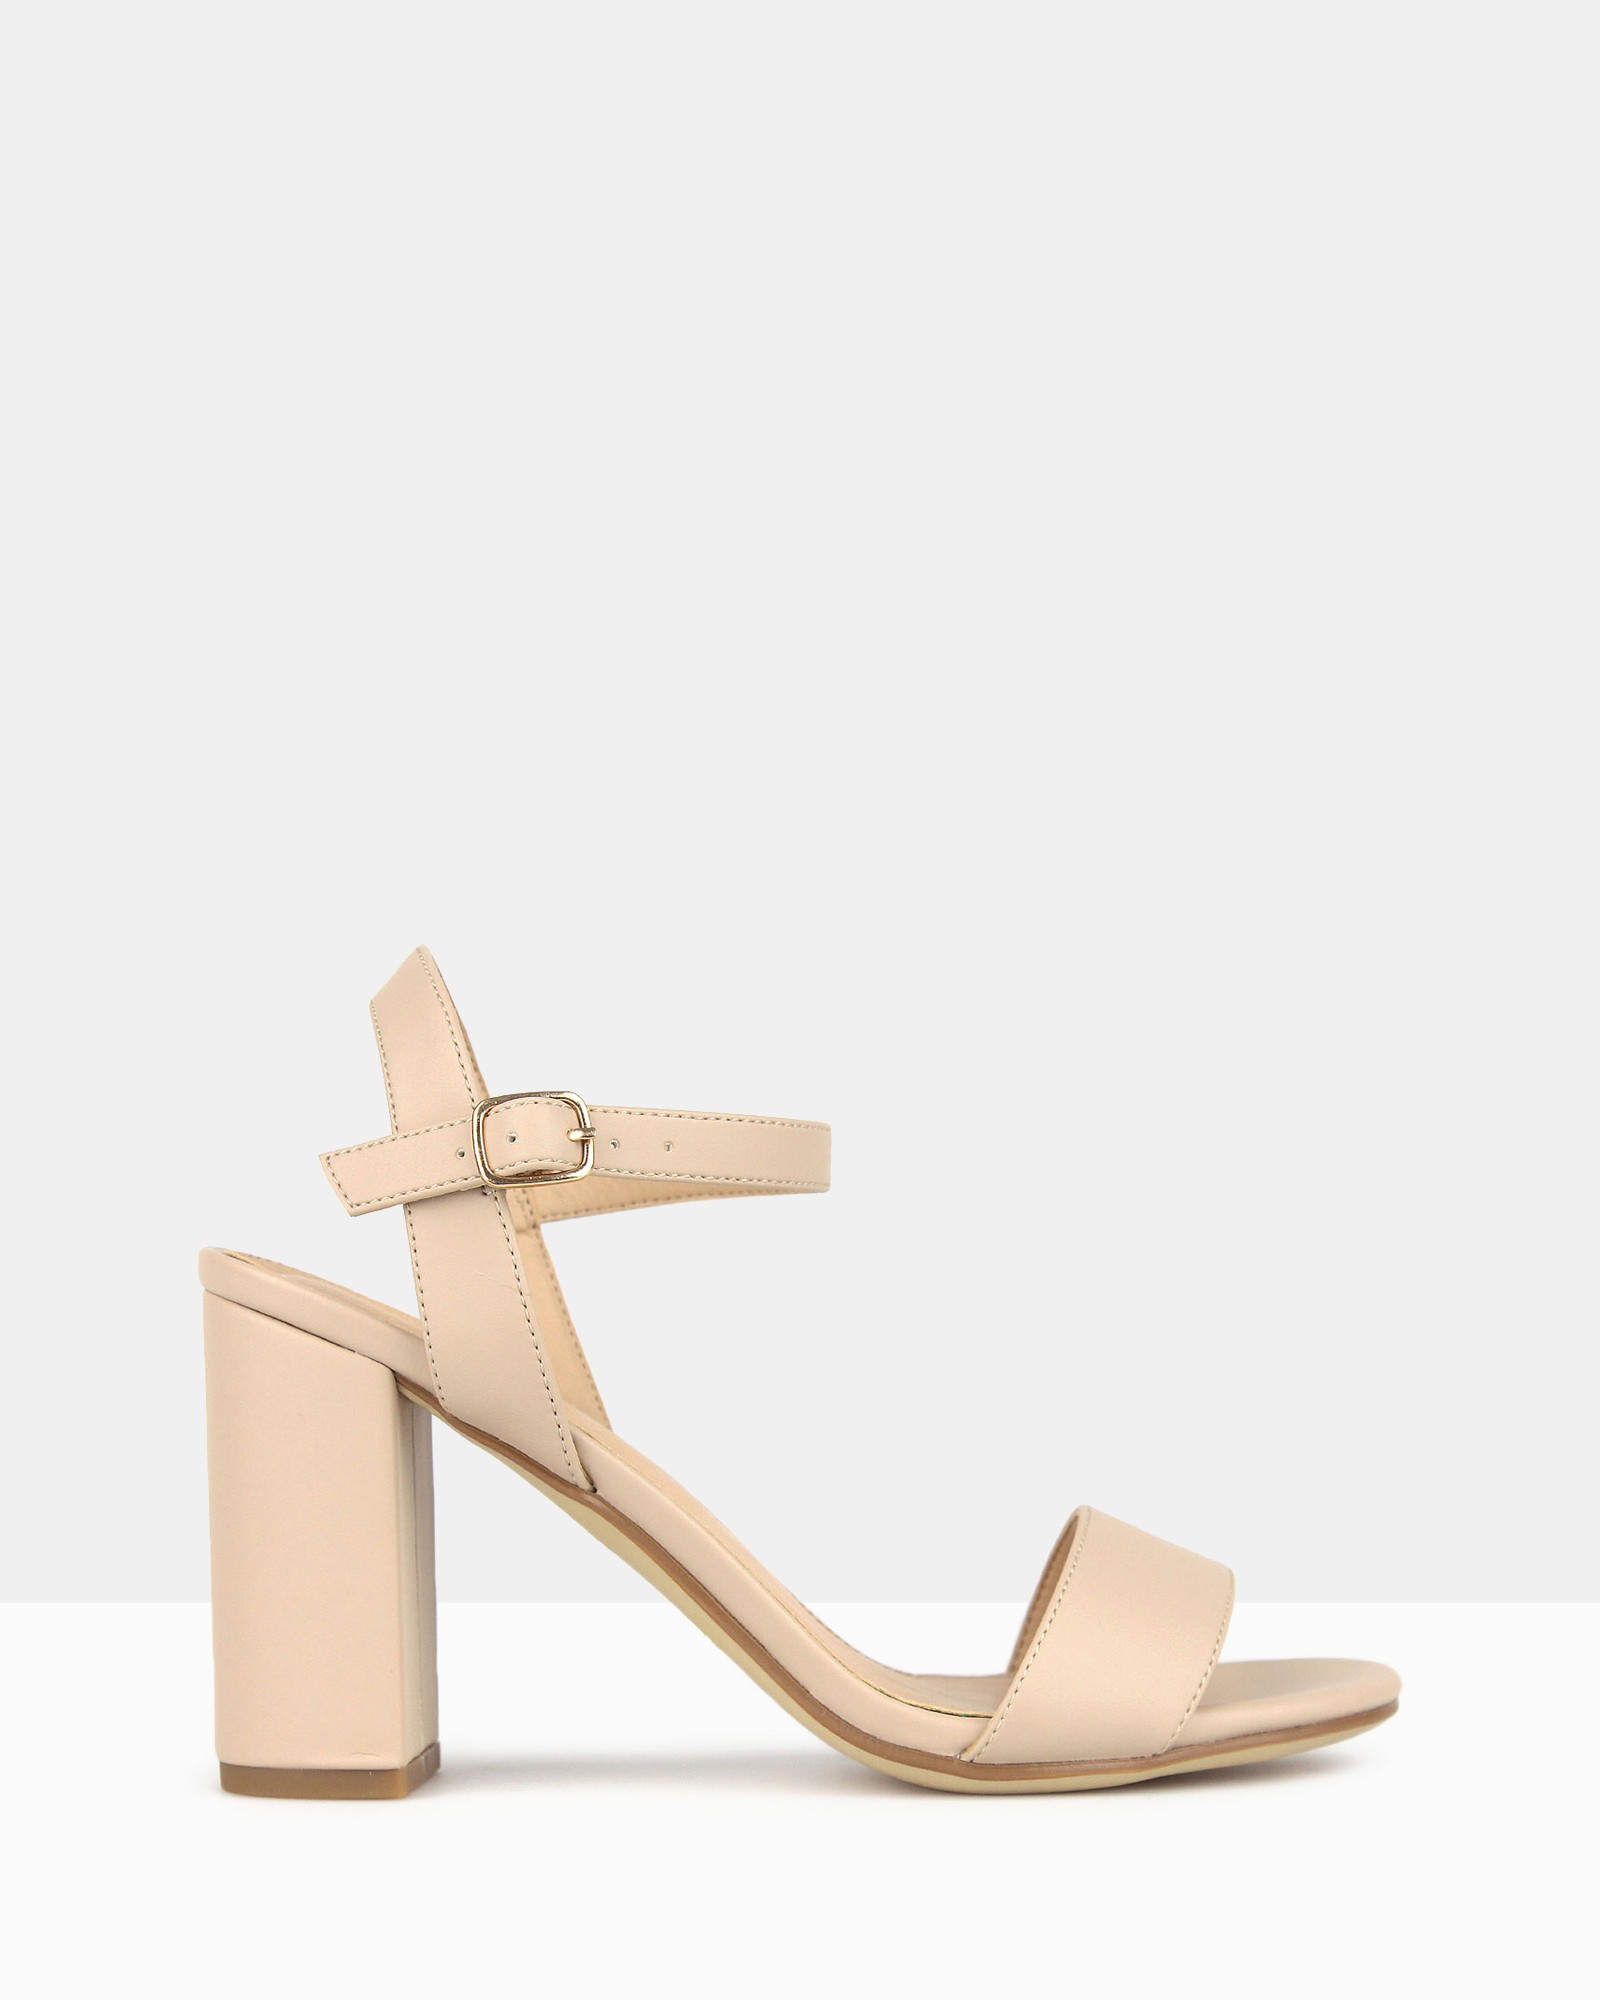 Karly Block Heel Sandals Nude by Betts | ShoeSales